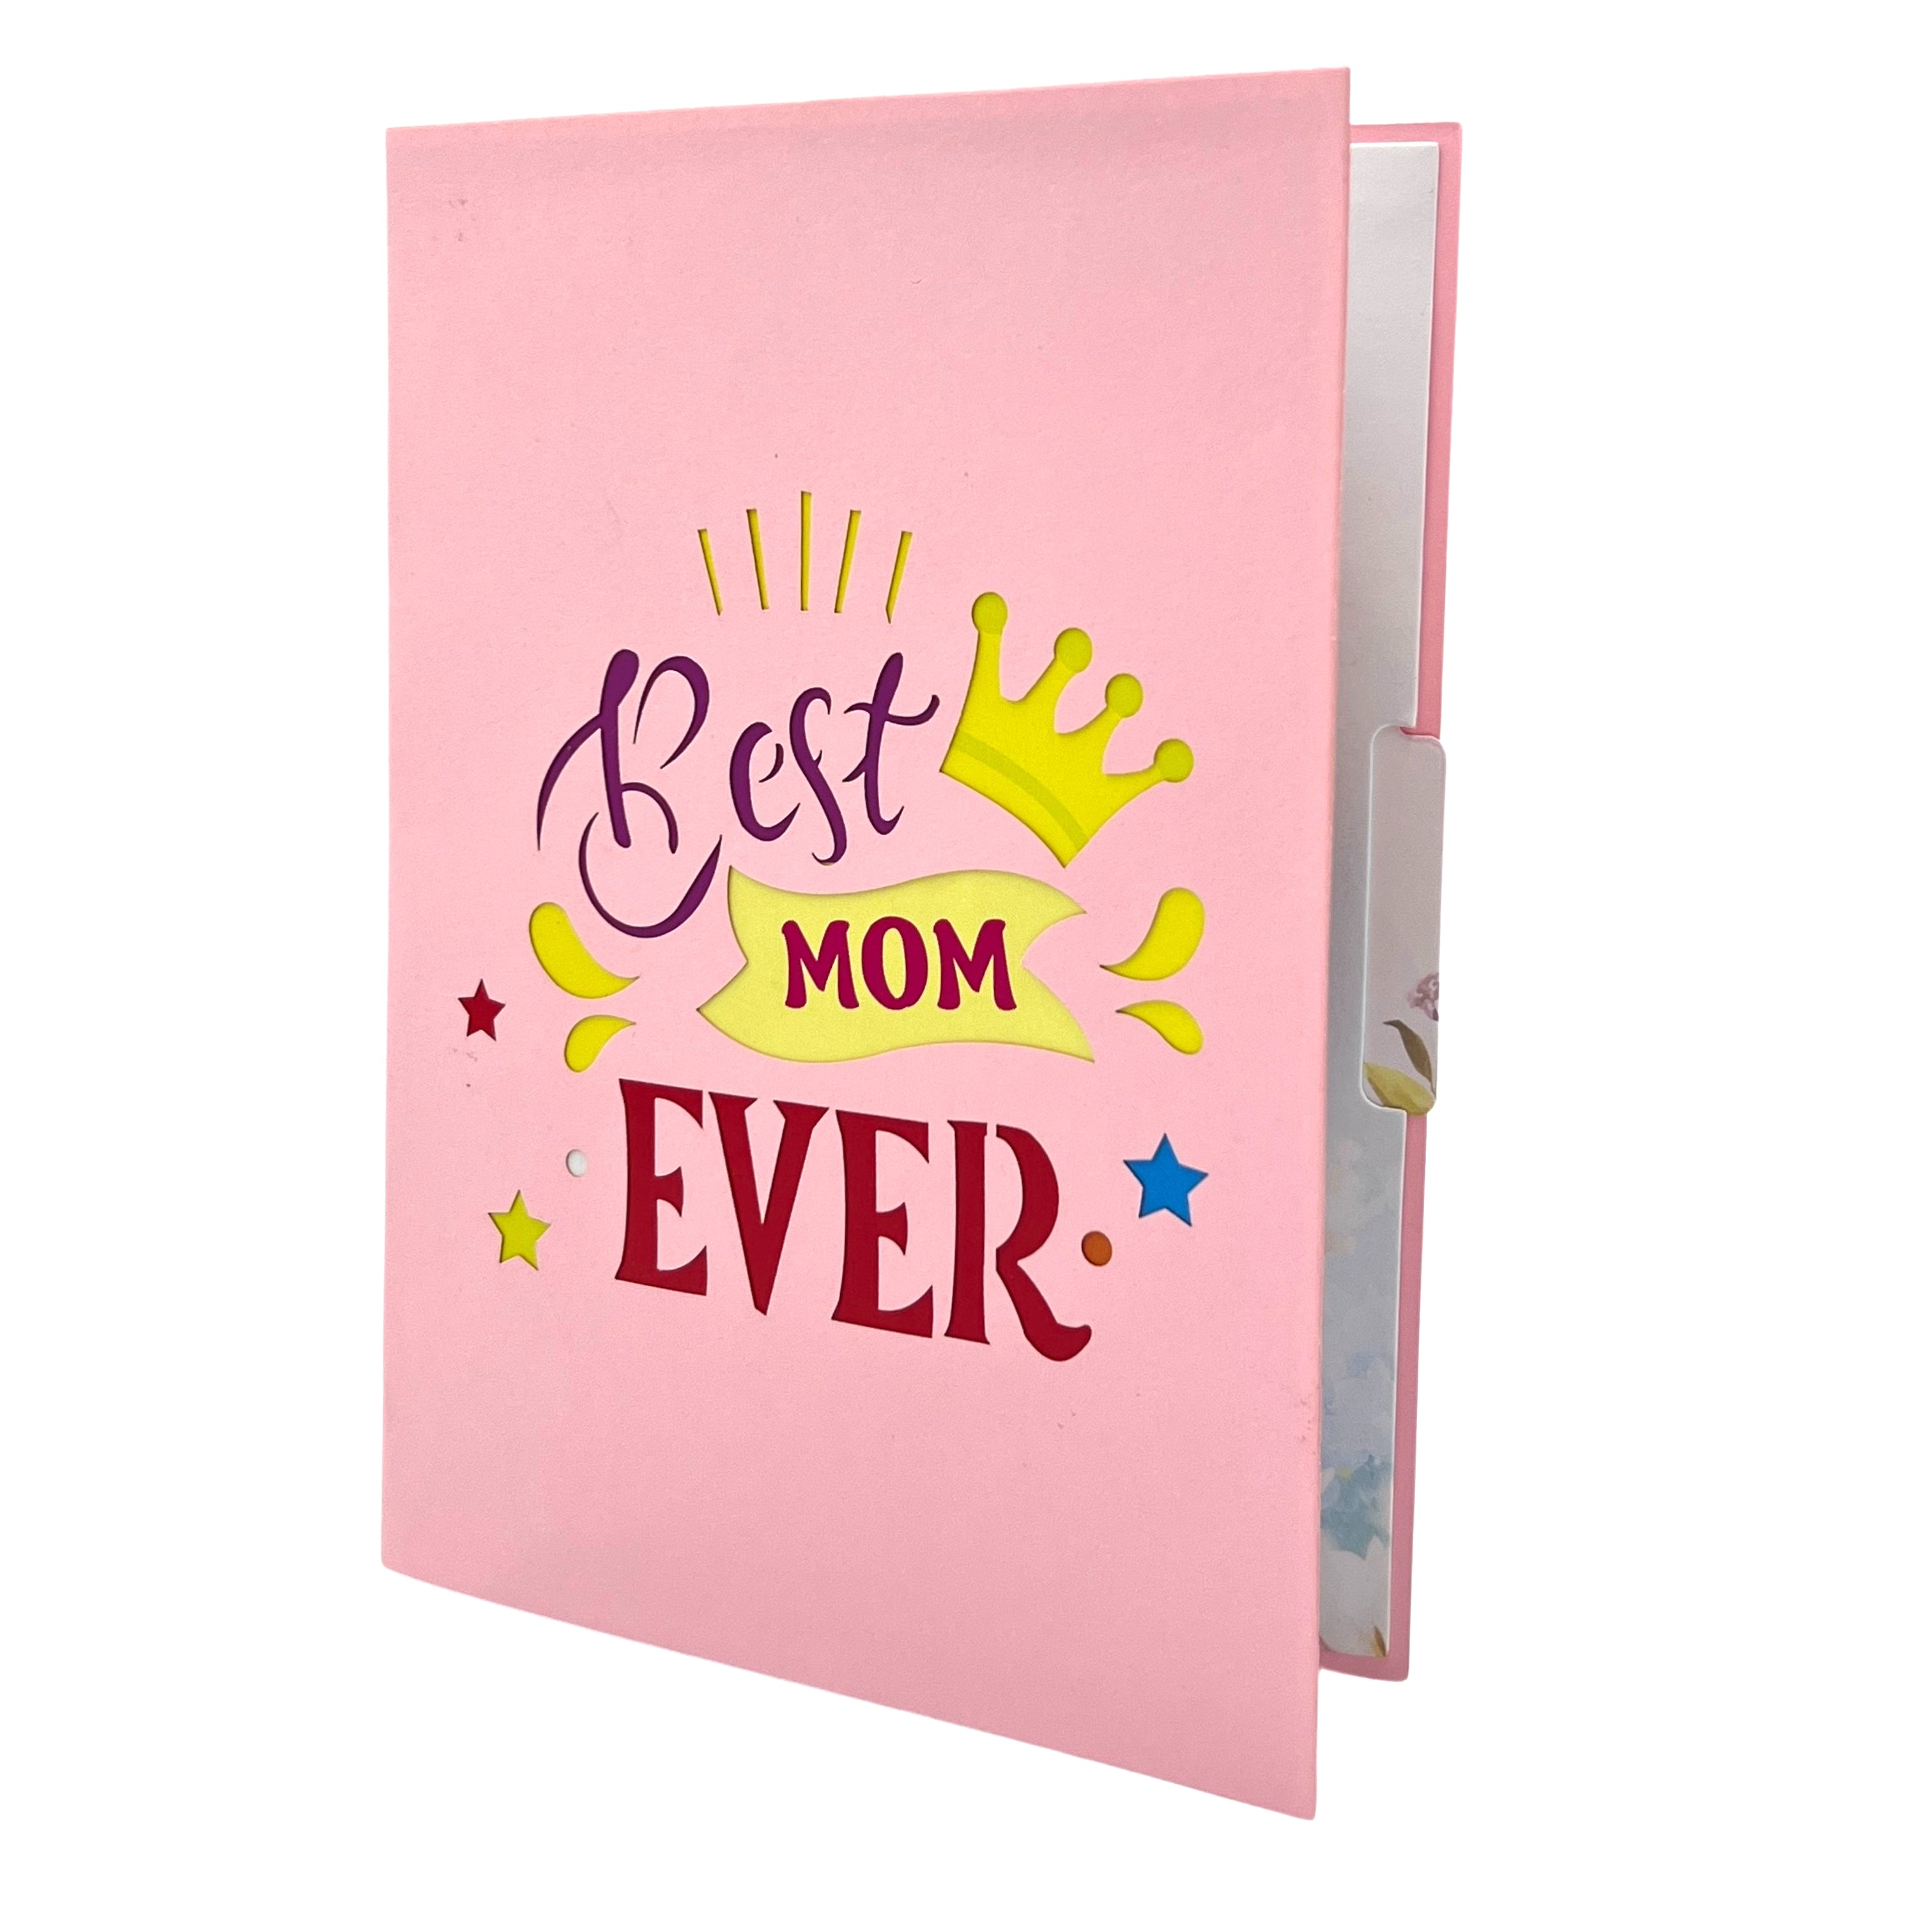 Pop Up Greeting Card, Best Mom Ever Card, Mom Card, Mother's Day Card, Mom Gift, Card for Mom, Birthday Card, Thank you Card, Flowers Card